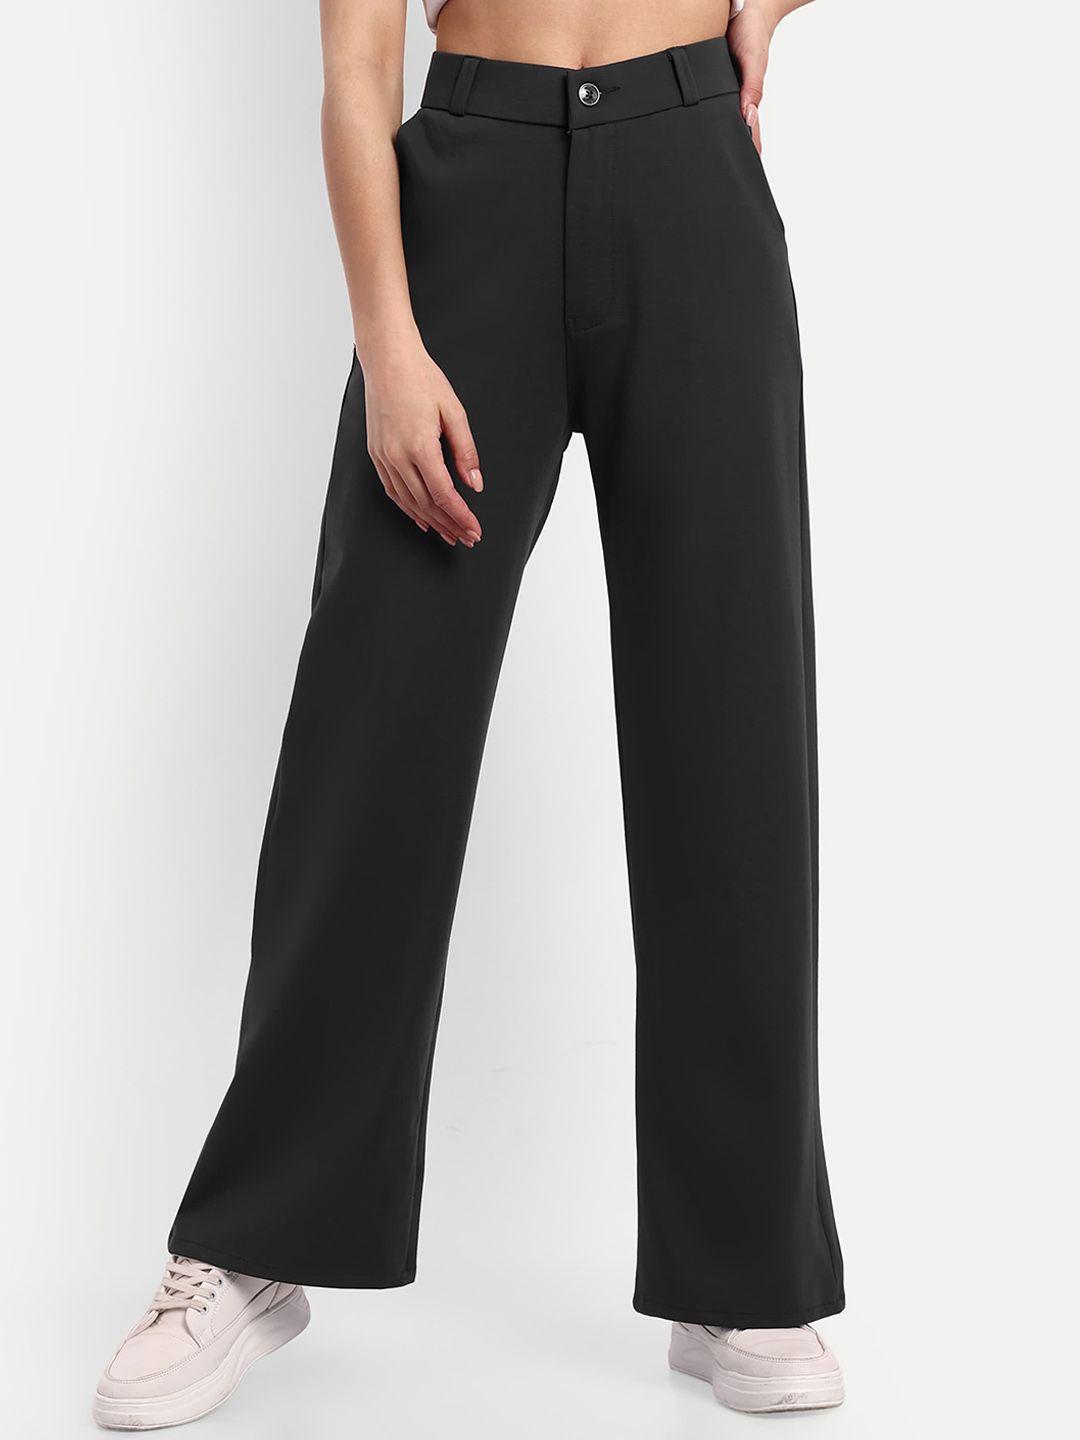 next-one-women-grey-smart-loose-fit-high-rise-easy-wash-trousers